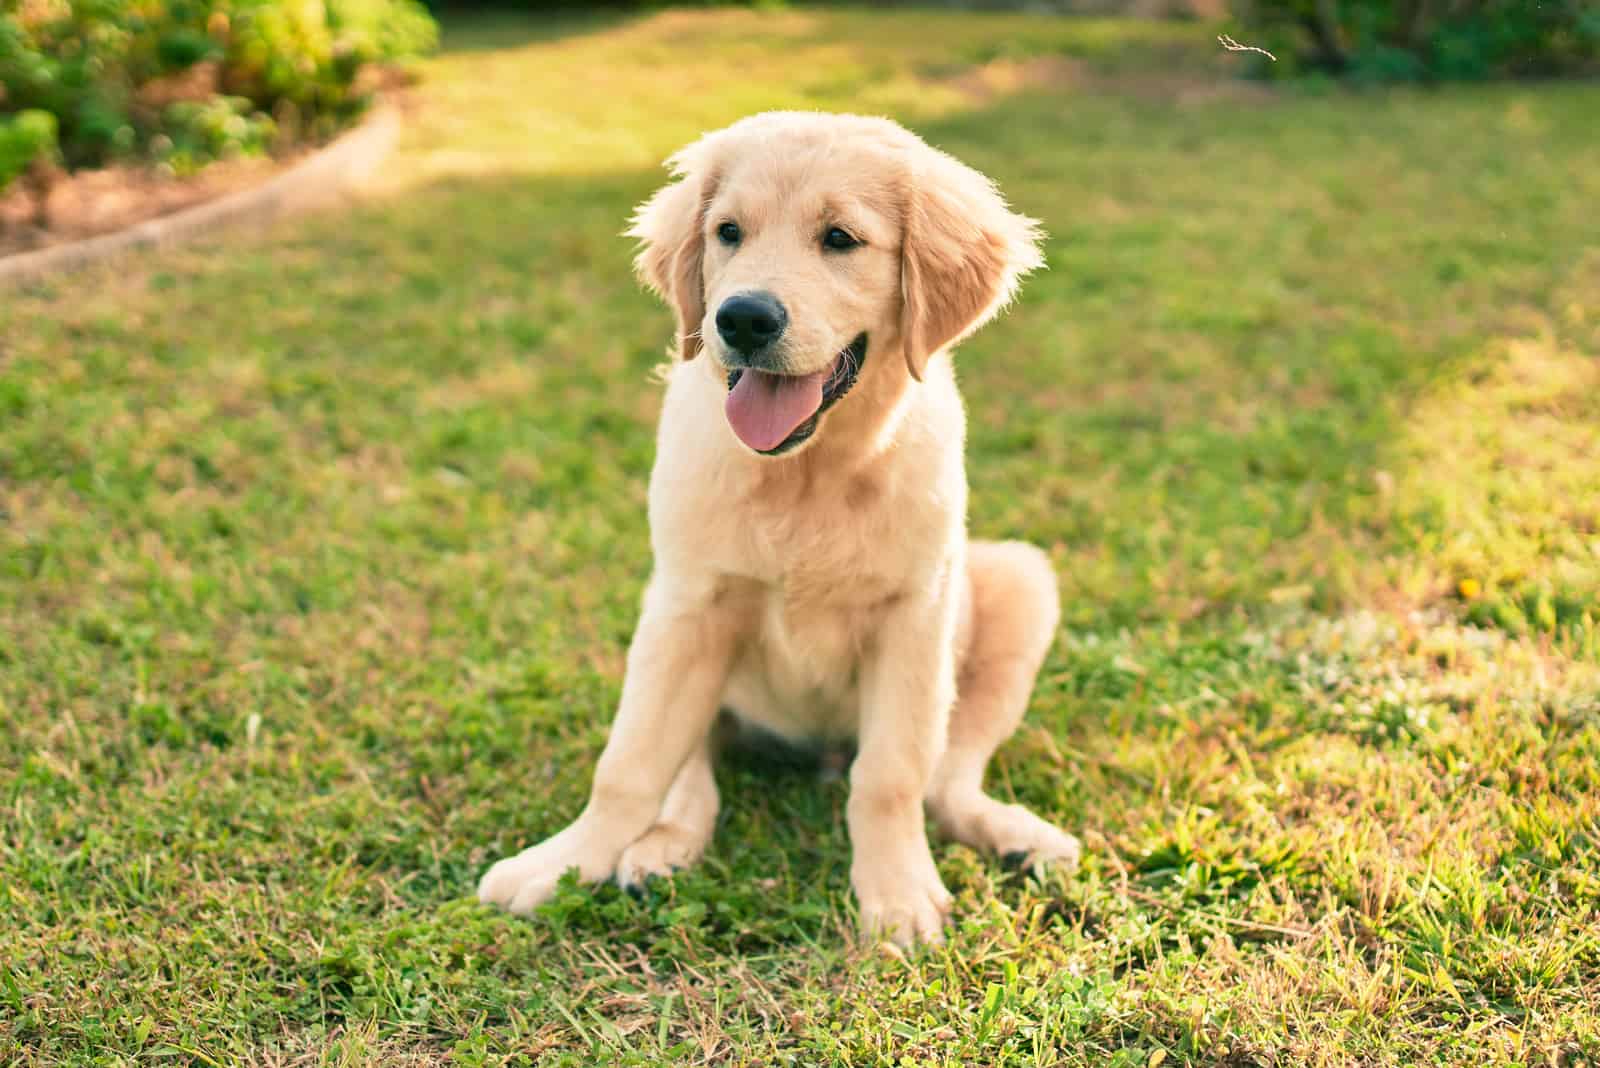 a labrador puppy sits in the grass and looks around